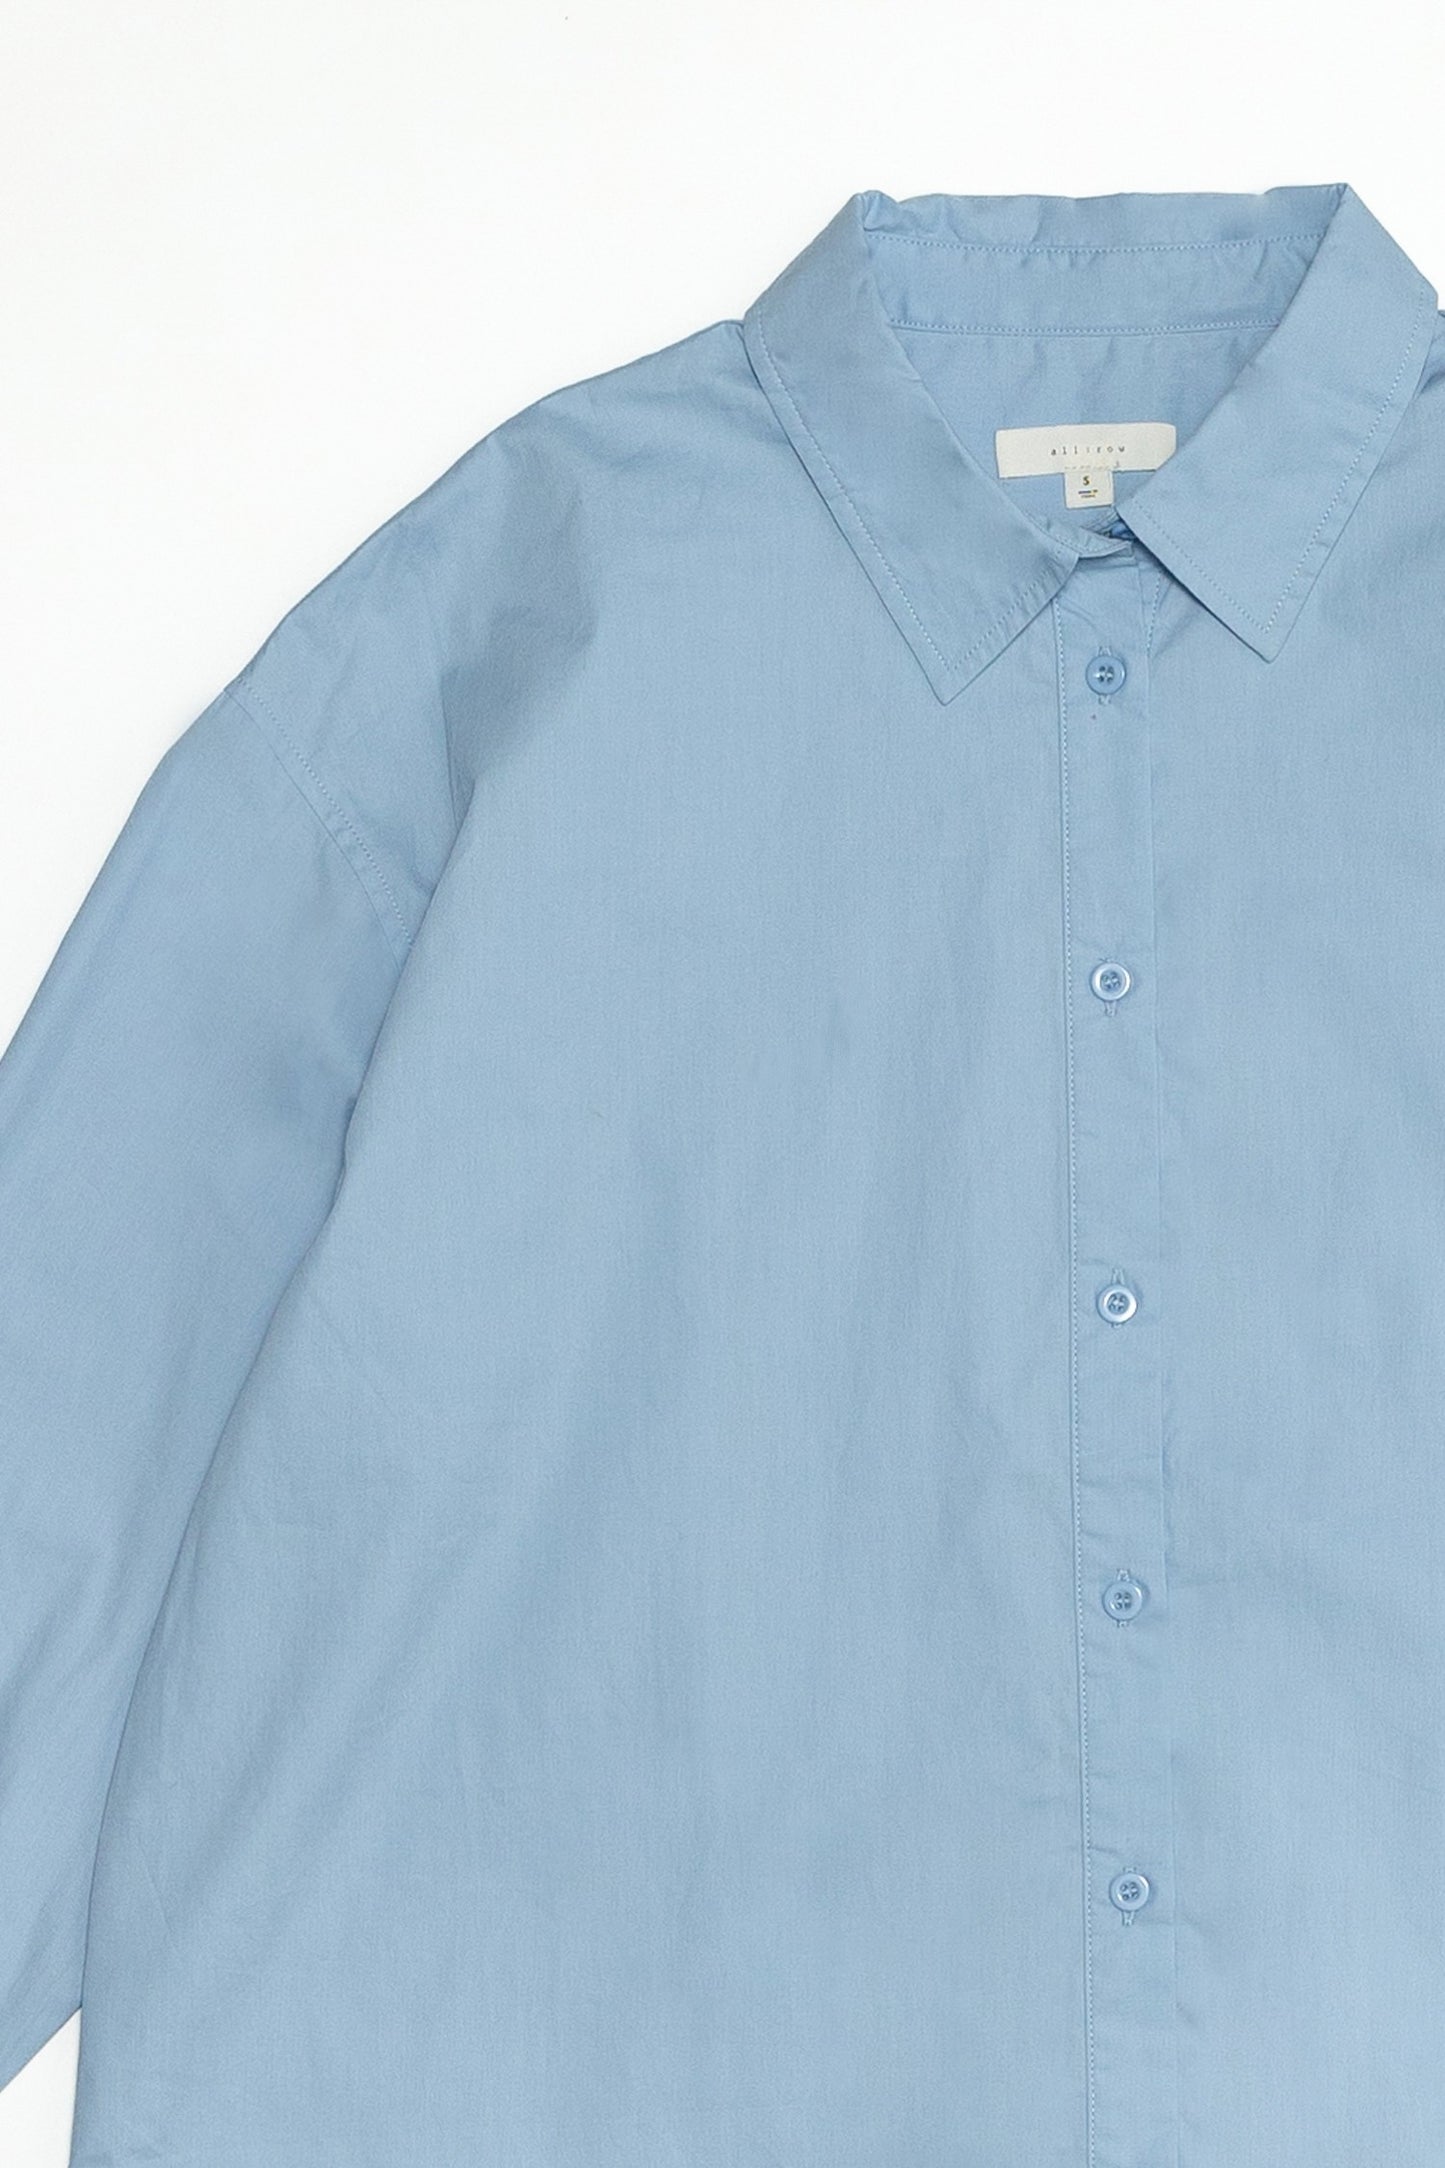 Up close of the blue button down shirt and showing how classic it looks and 100% made from cotton. 